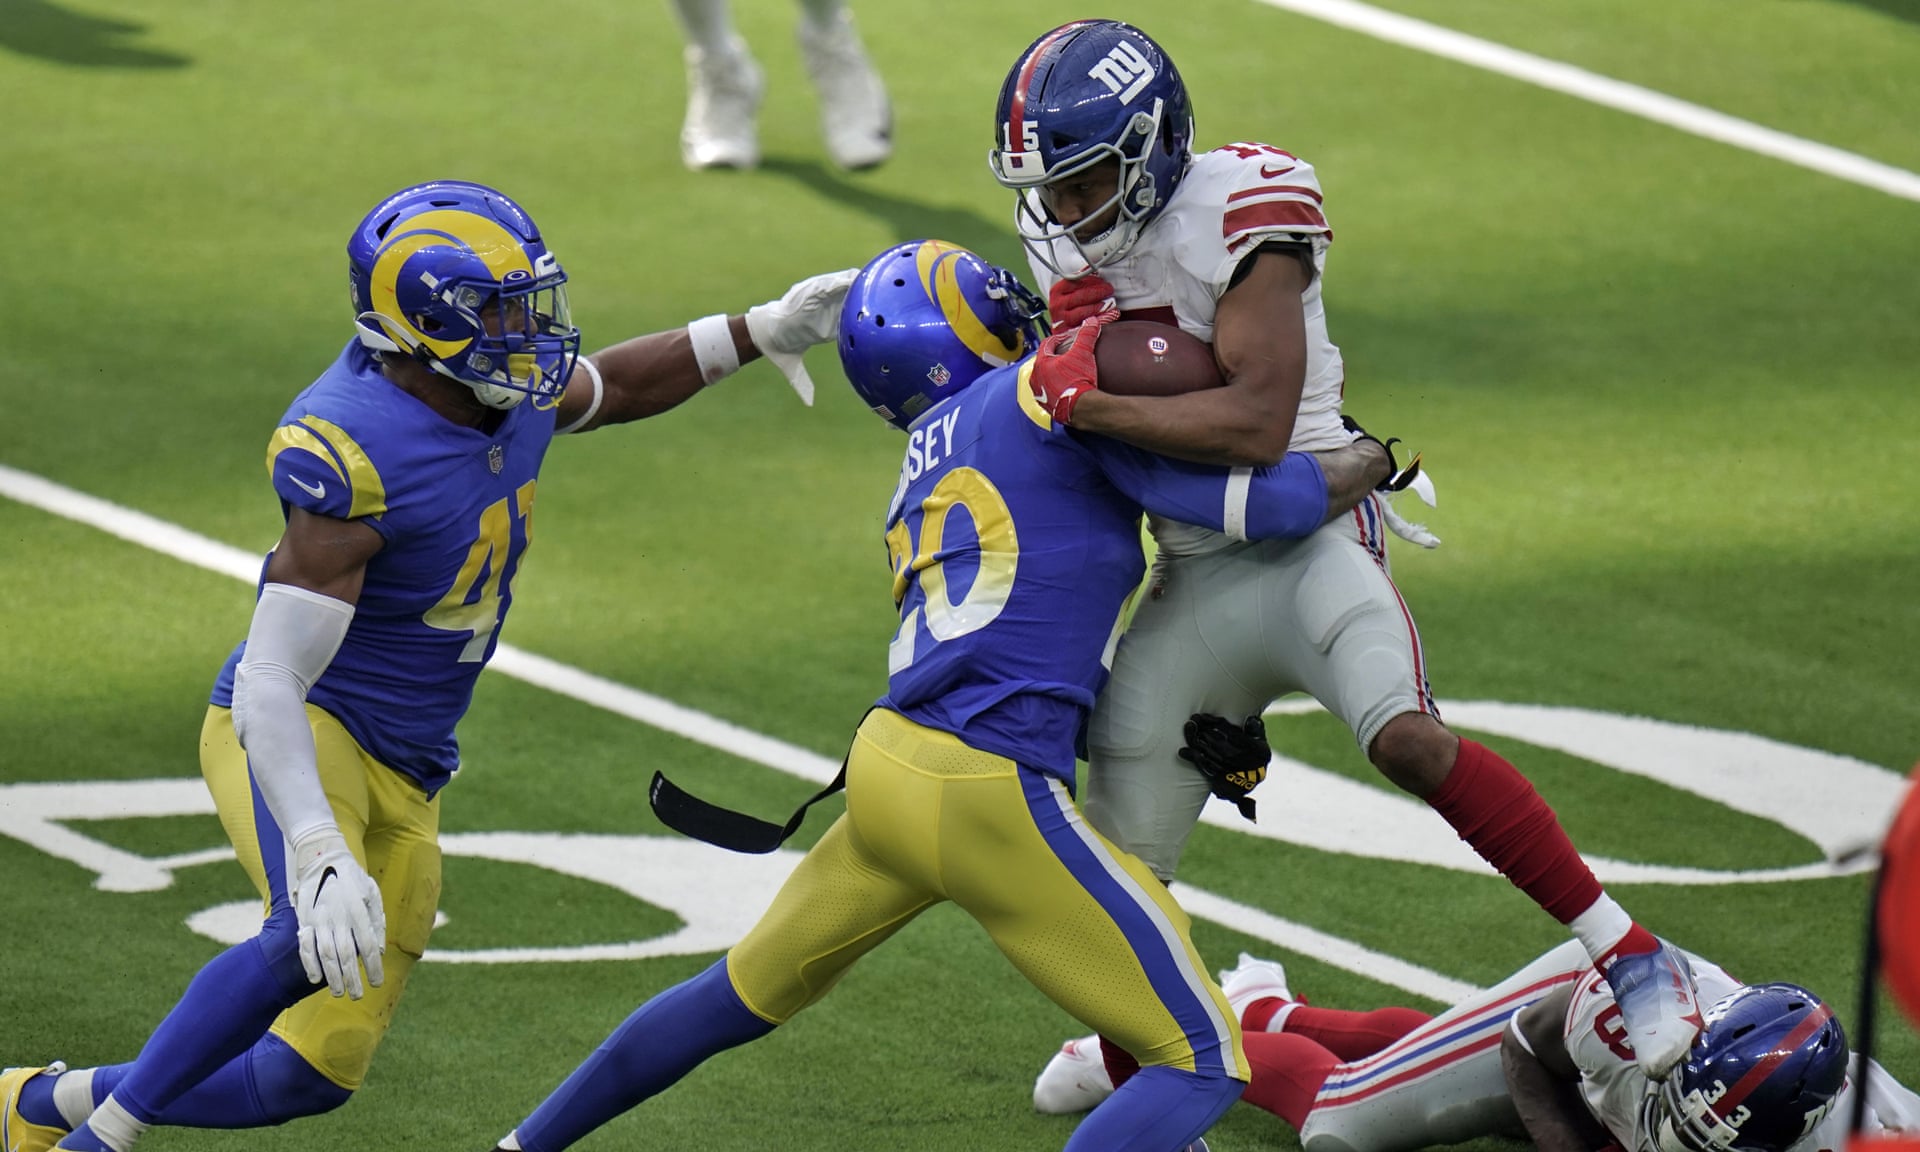 Jalen Ramsey and Golden Tate Fight Breaks Out After Giants-Rams Game as Family Drama Boils Over